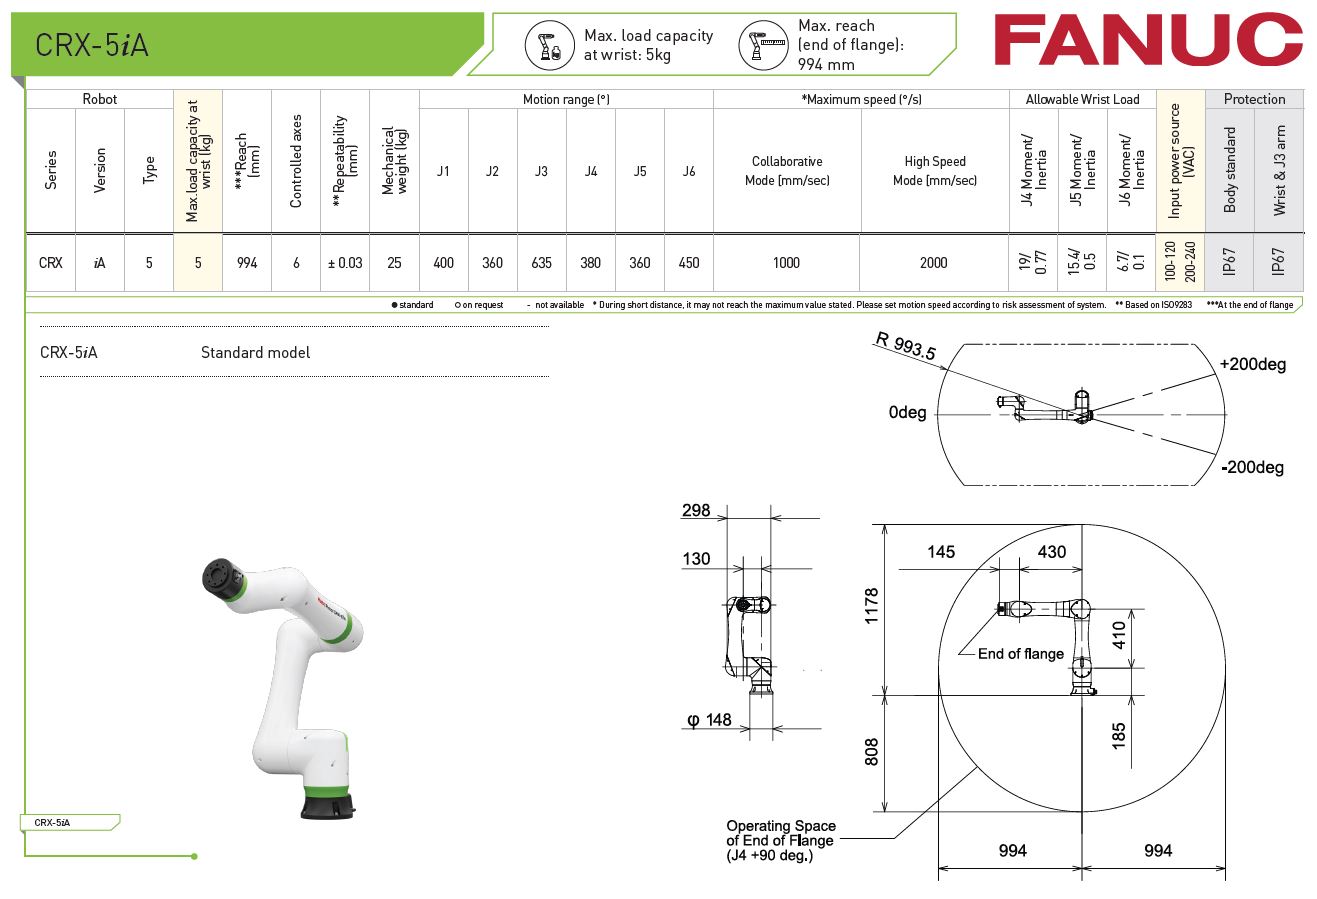 Fanuc CRX-5iA Fanuc Cobot Specification from RobotWorld